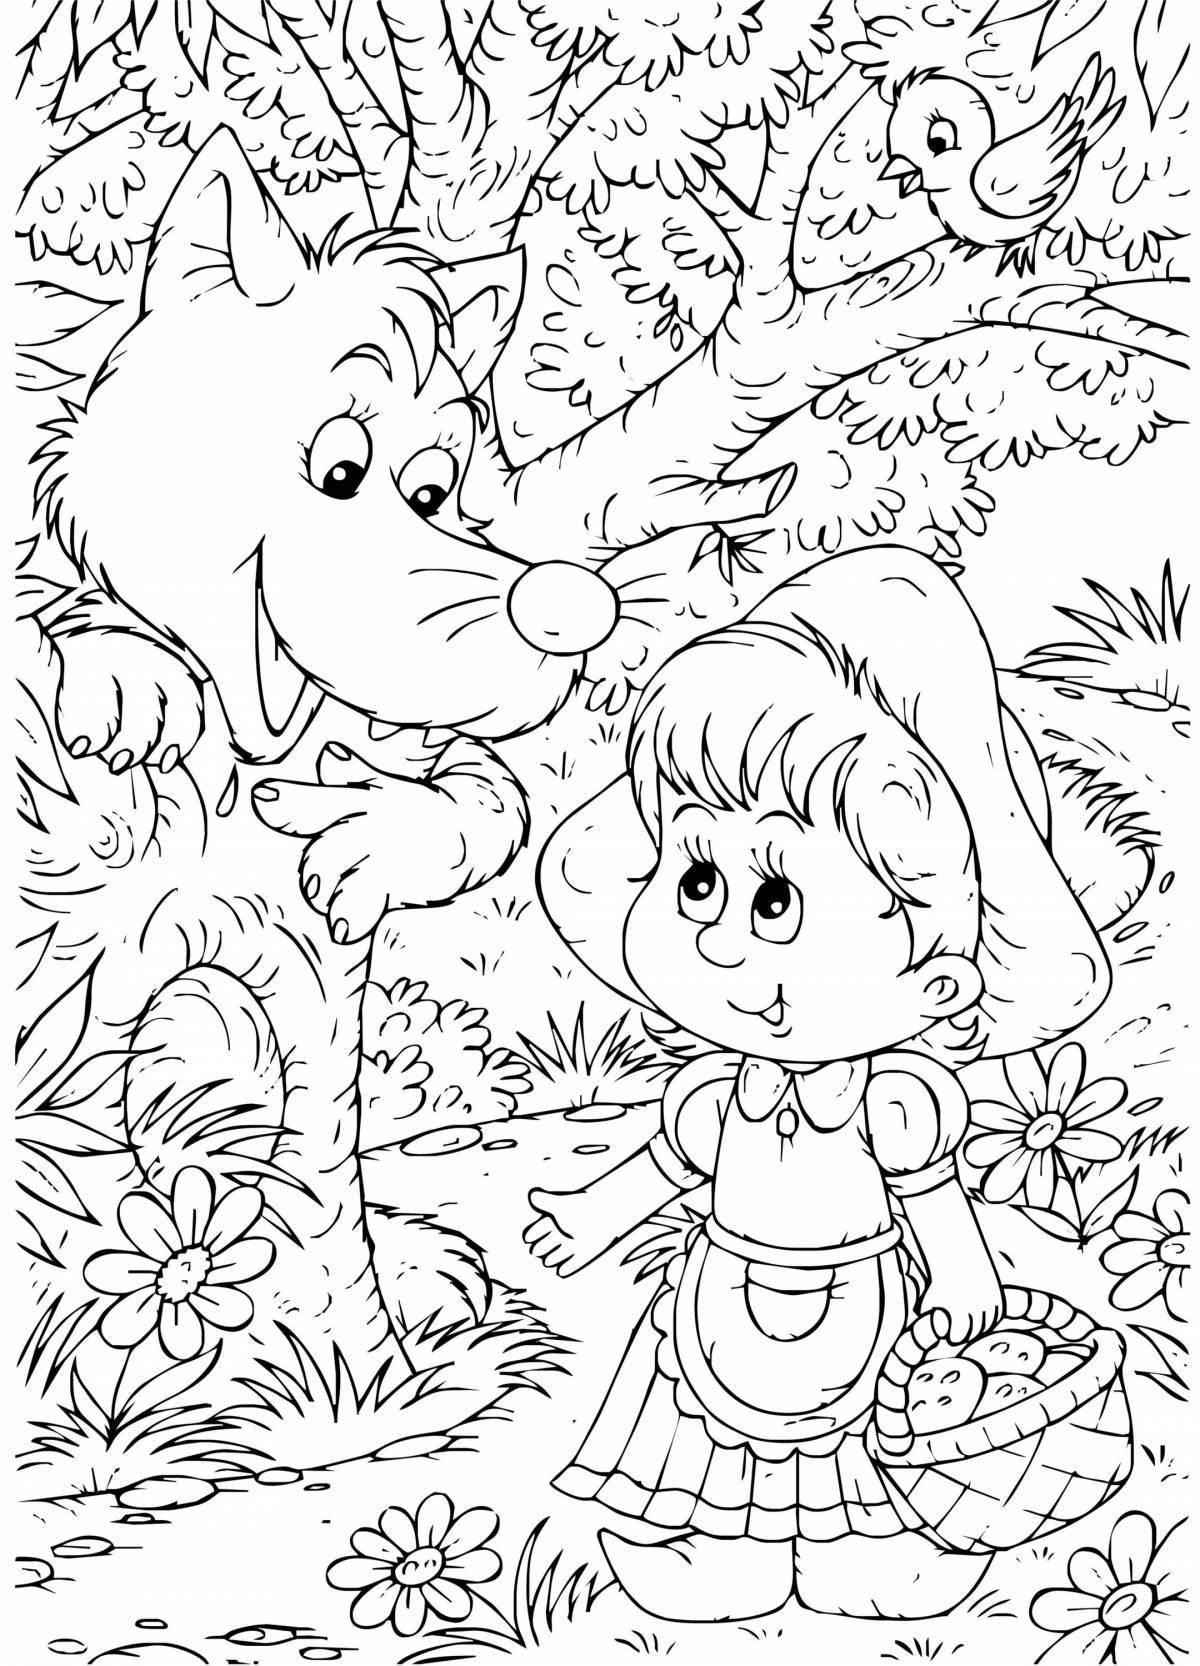 Awesome little red riding hood coloring book